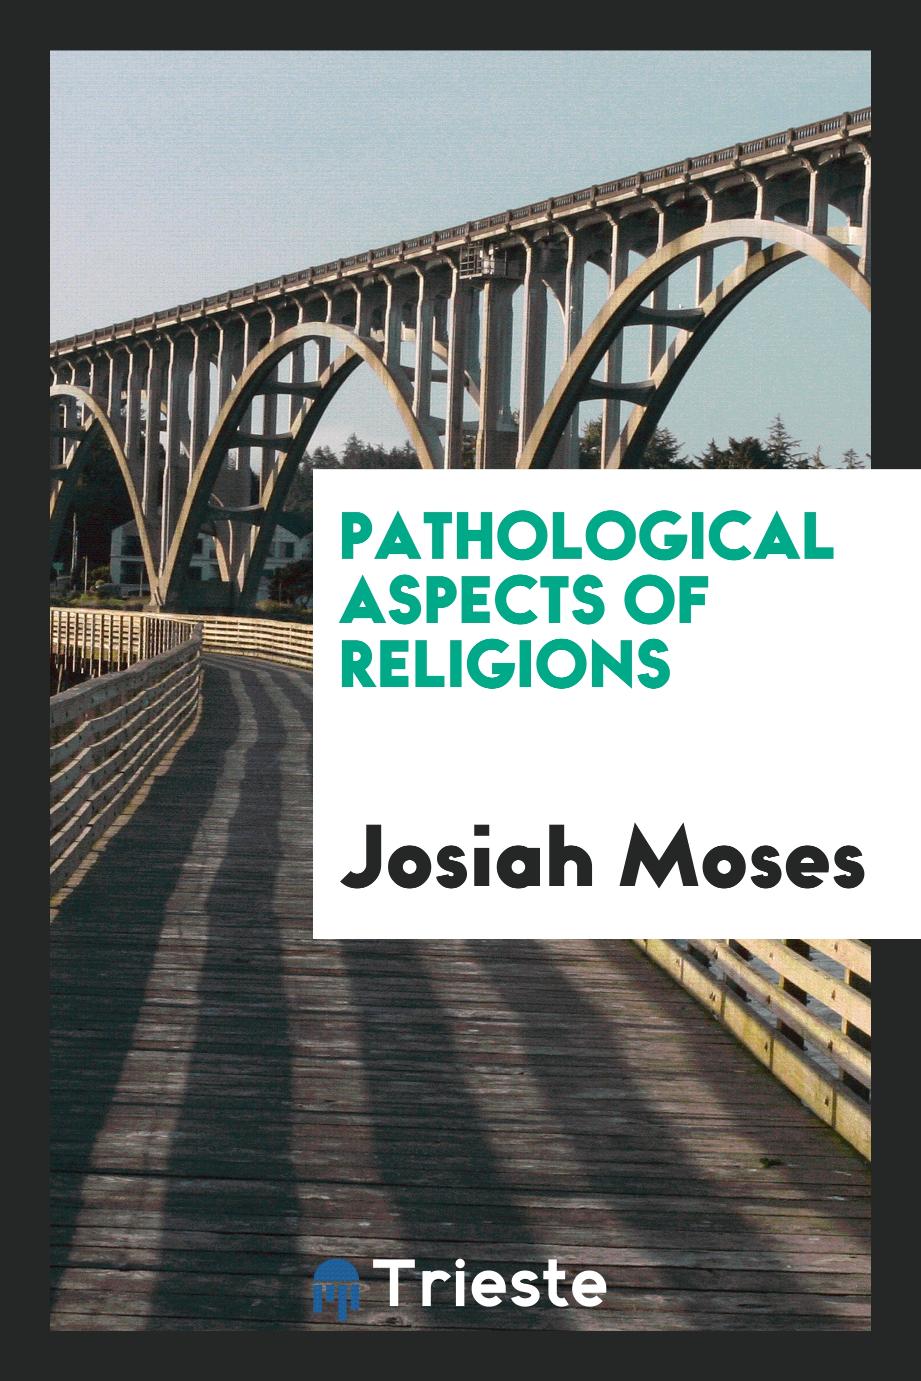 Pathological aspects of religions